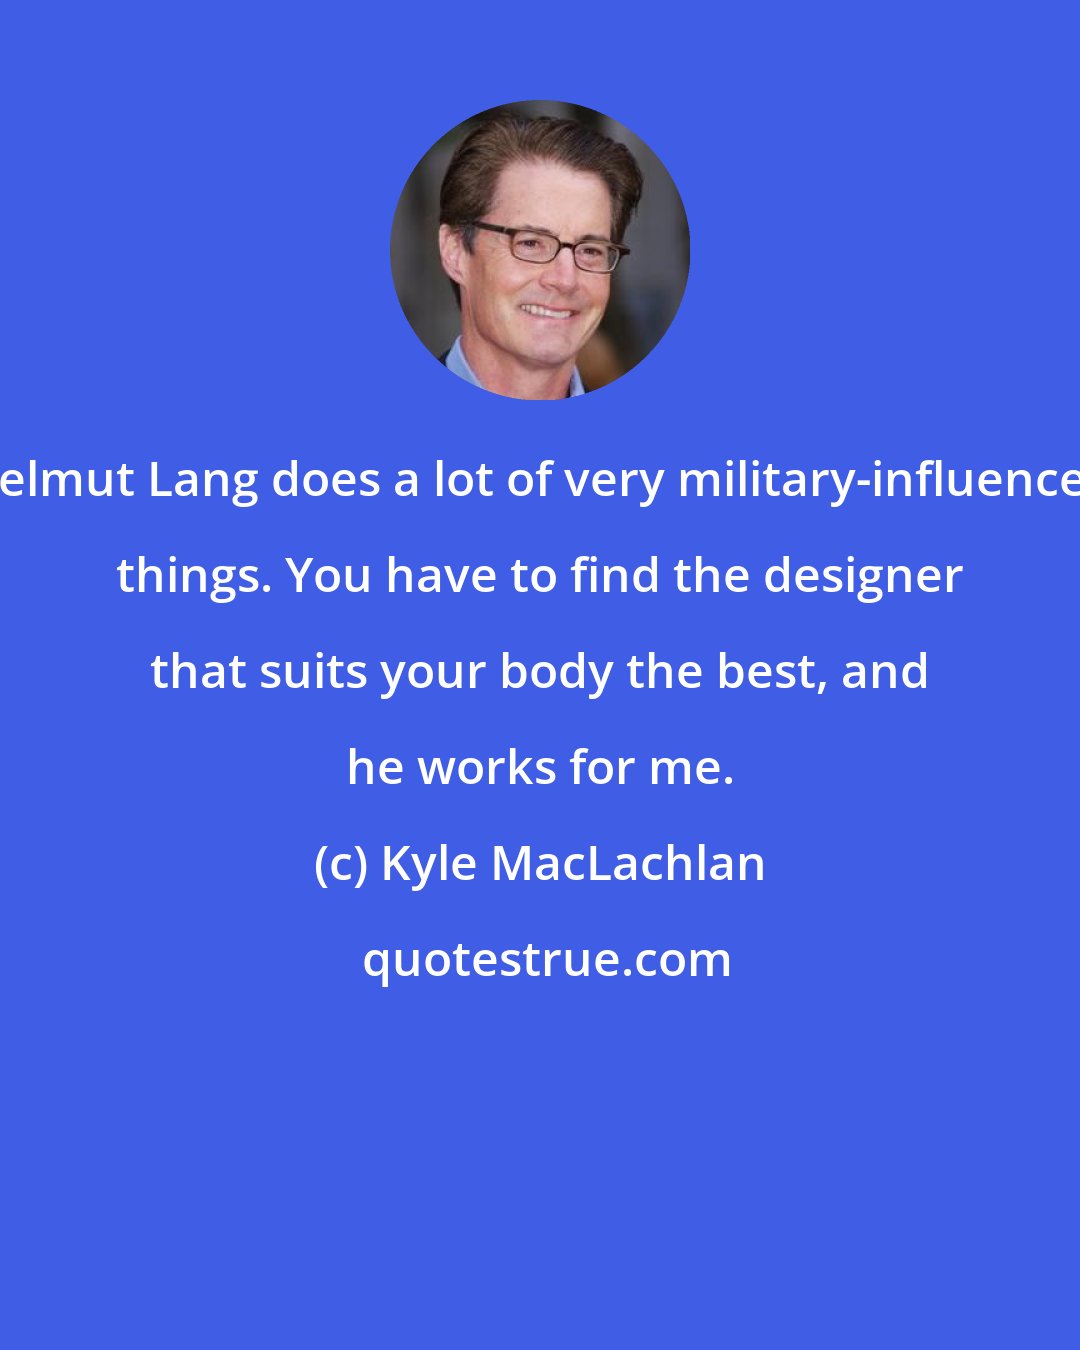 Kyle MacLachlan: Helmut Lang does a lot of very military-influenced things. You have to find the designer that suits your body the best, and he works for me.